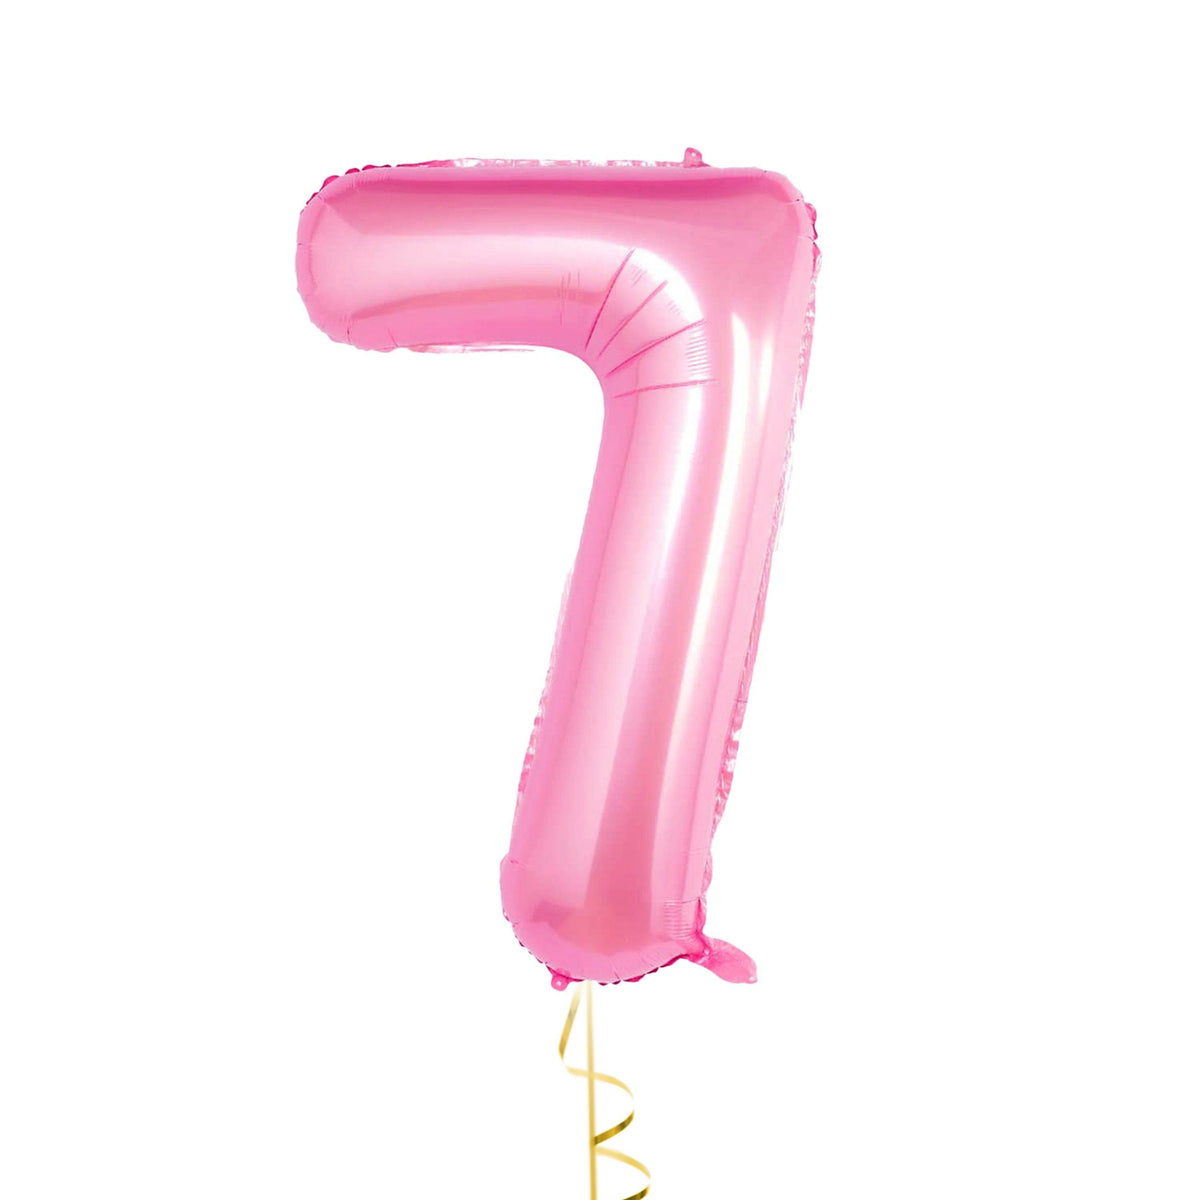 32 Inch Foil Pink Number Seven Shaped Balloon - Perfect for Magnificent Seven-Year Celebrations!